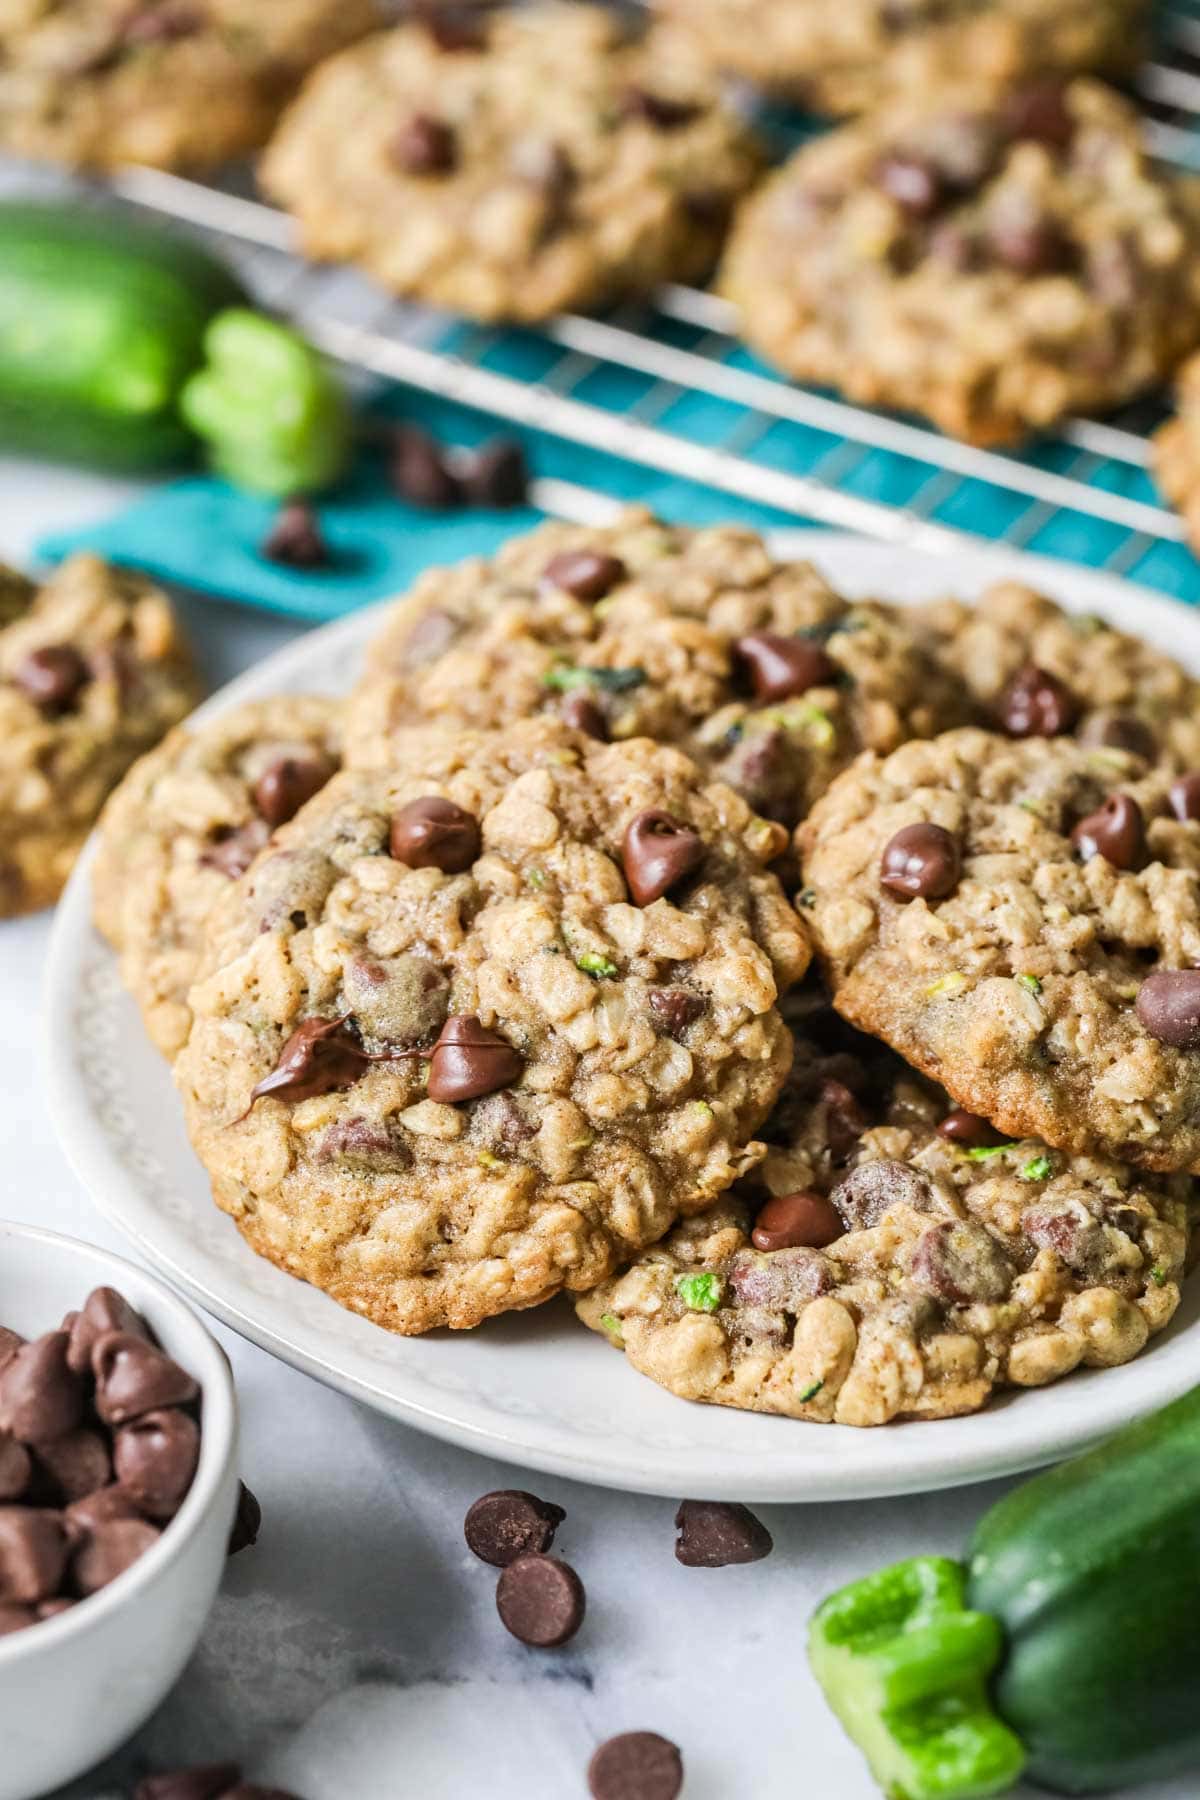 Cookies made with oatmeal, chocolate chips, and zucchini on a white plate.